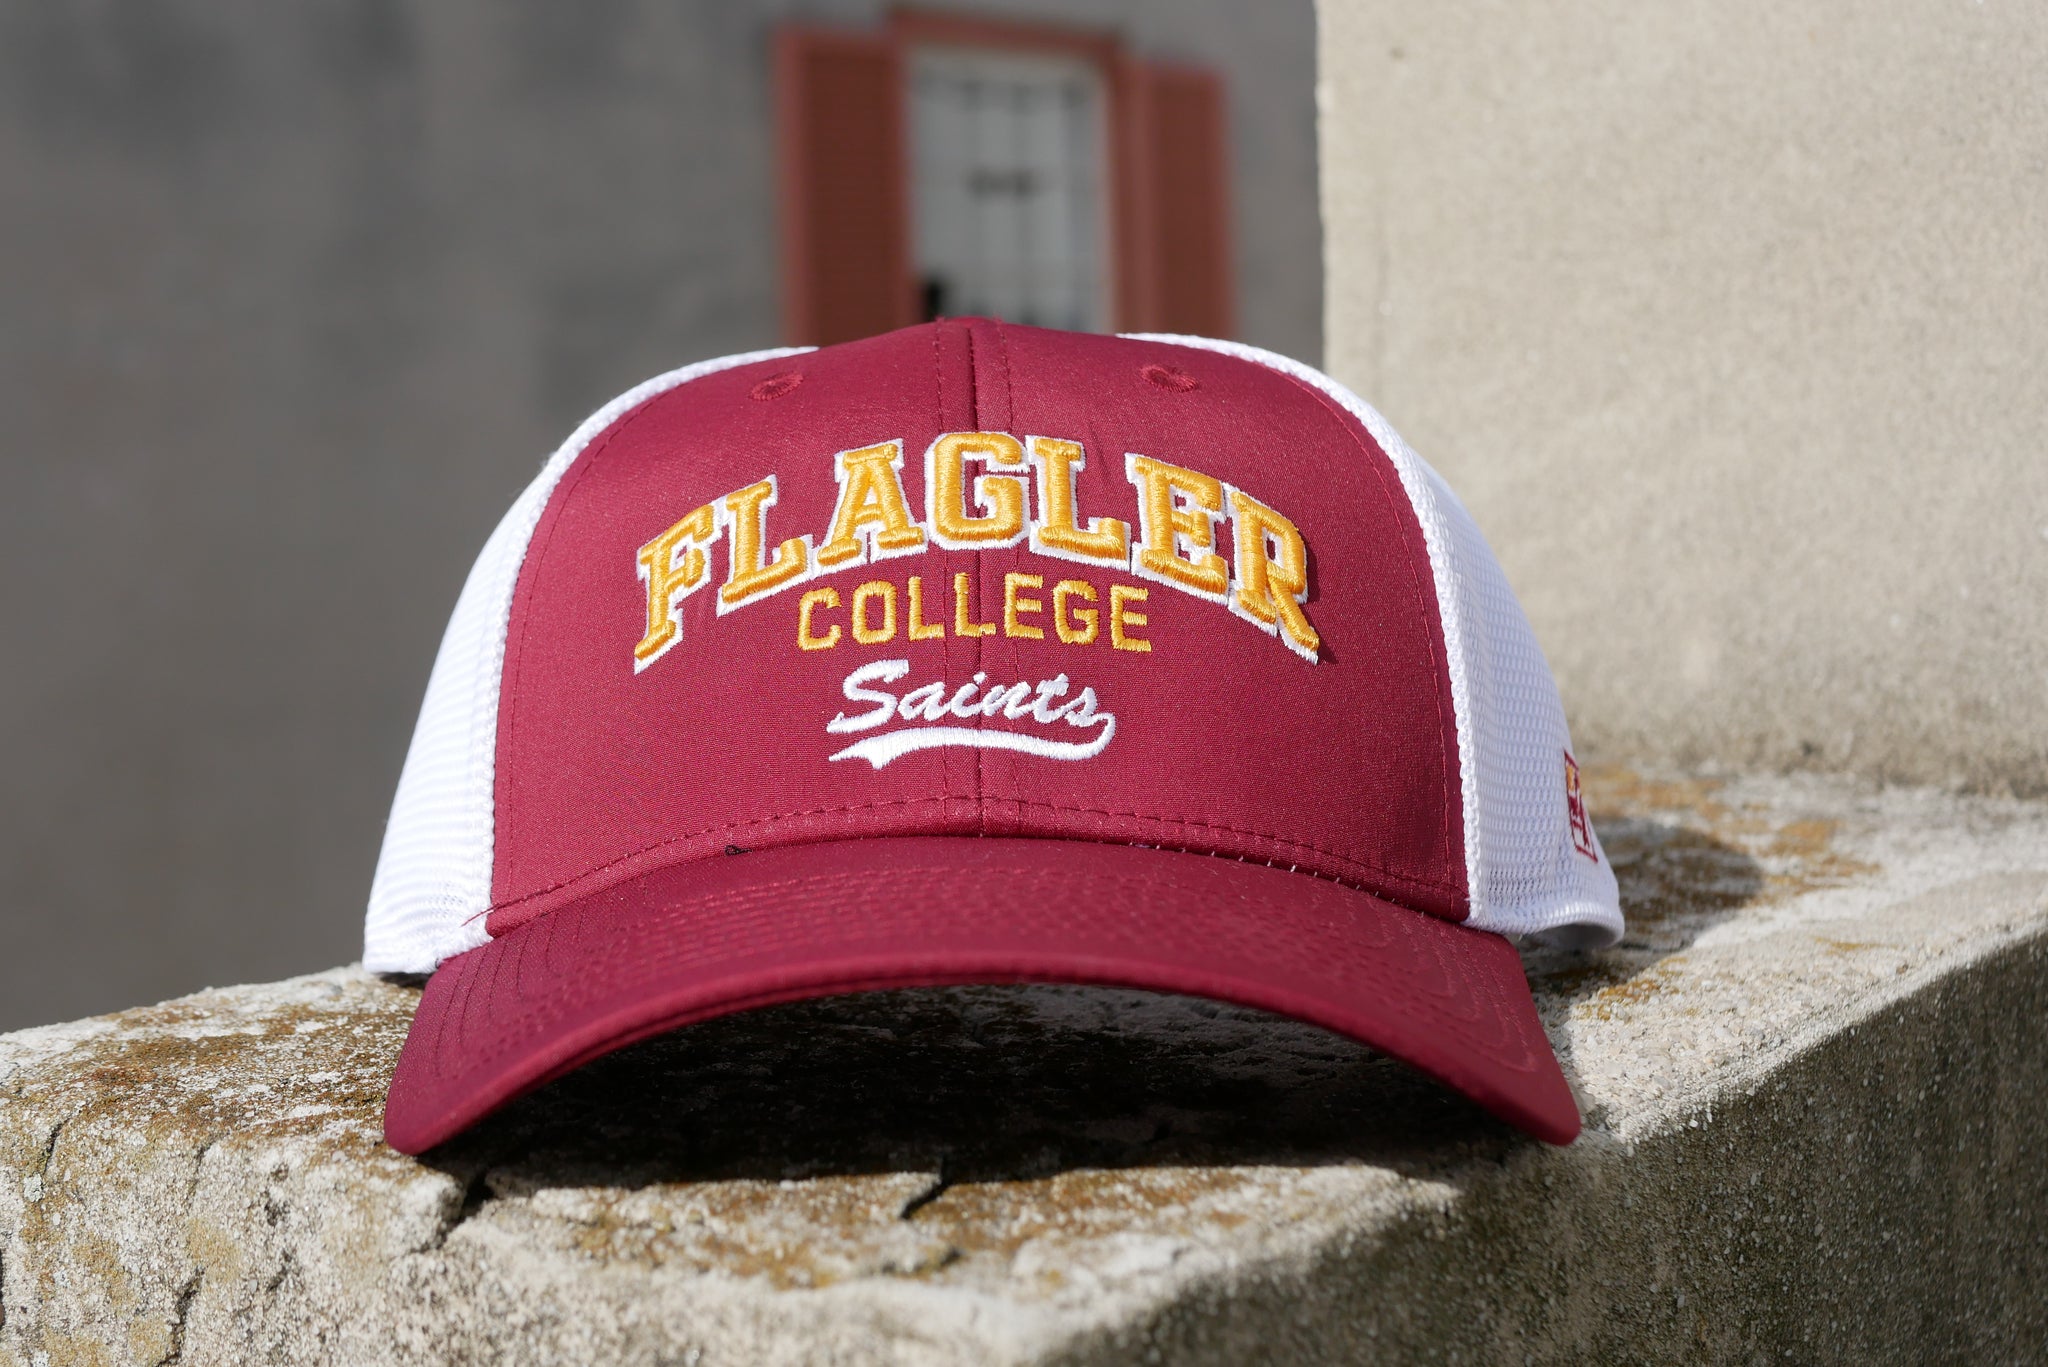 Red hat with mesh white back. Yellow embroider saying Flagler over College over white cursive embroider saying Saints